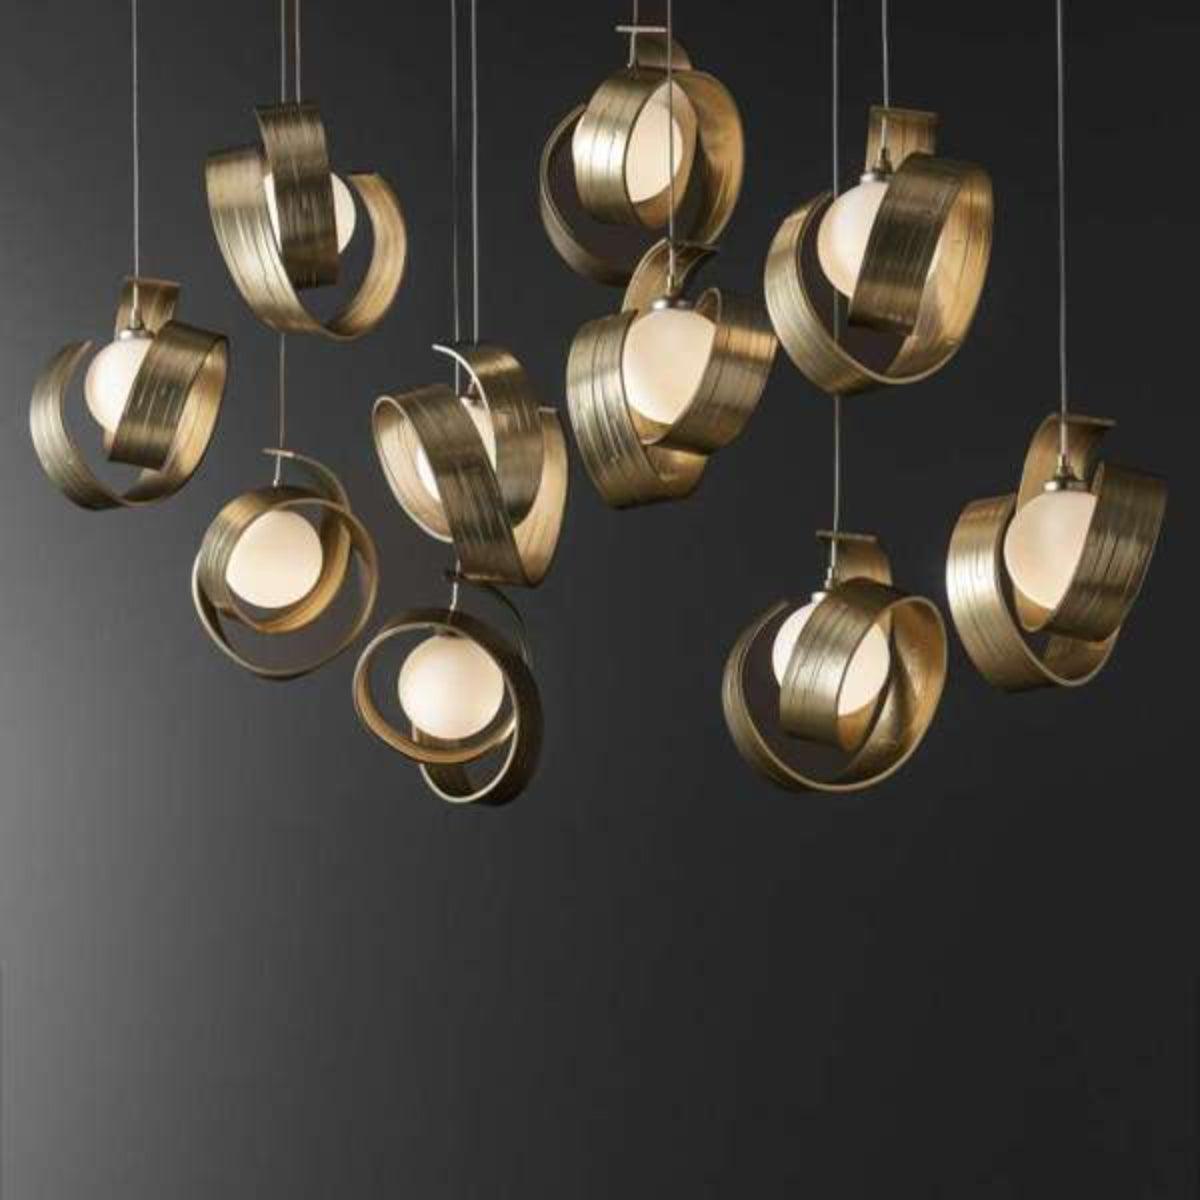 Riza 47 in. 10 lights Linear Pendant Light with Standard Height